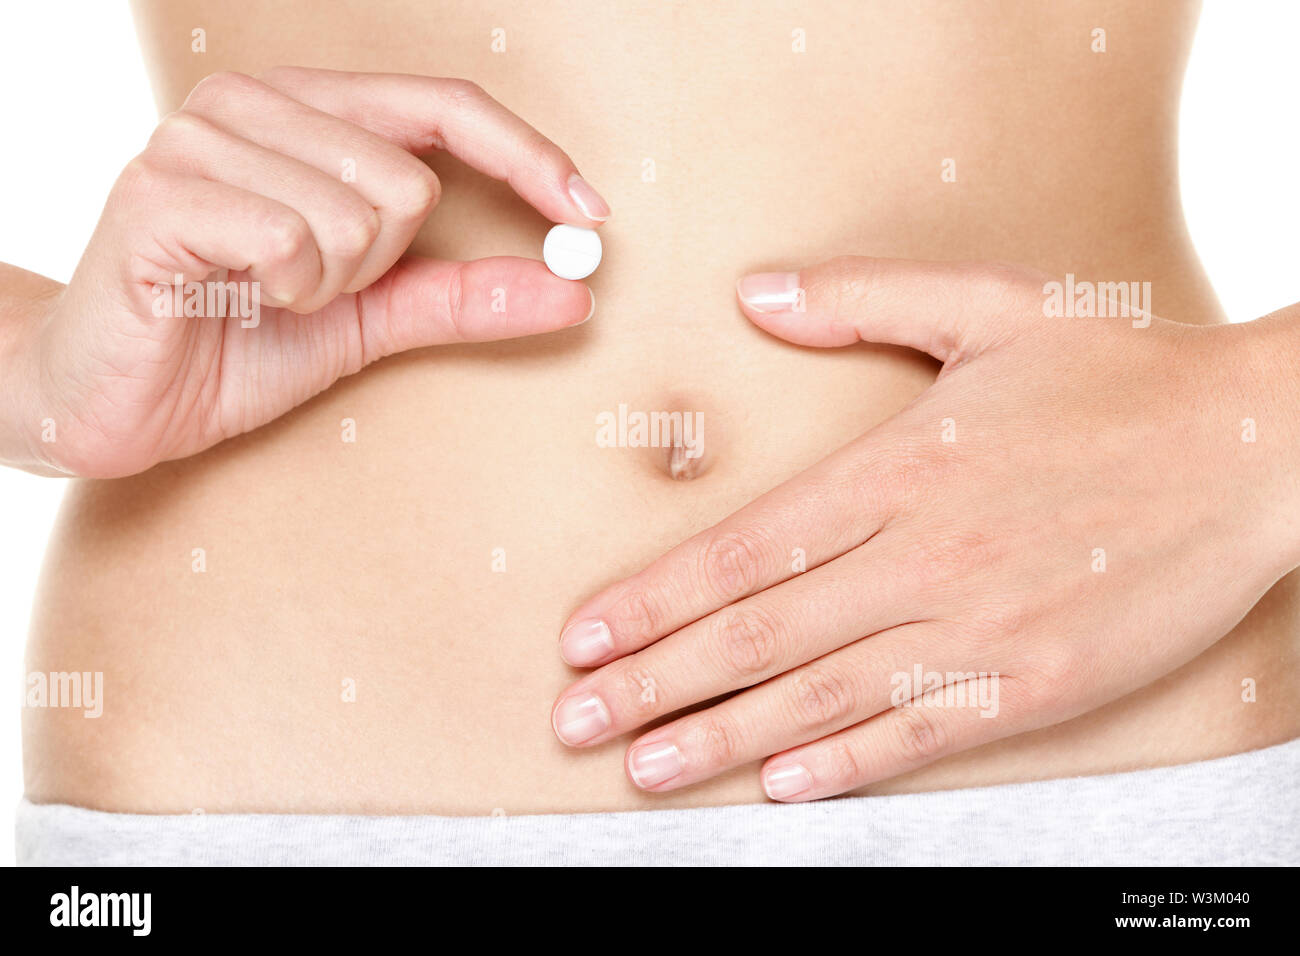 Birth control pill, Contraceptive pills, Vitamin pill, pills for better digestion or pills against menstrual pain. Woman holding white tablet in front of stomach. Close up. Stock Photo